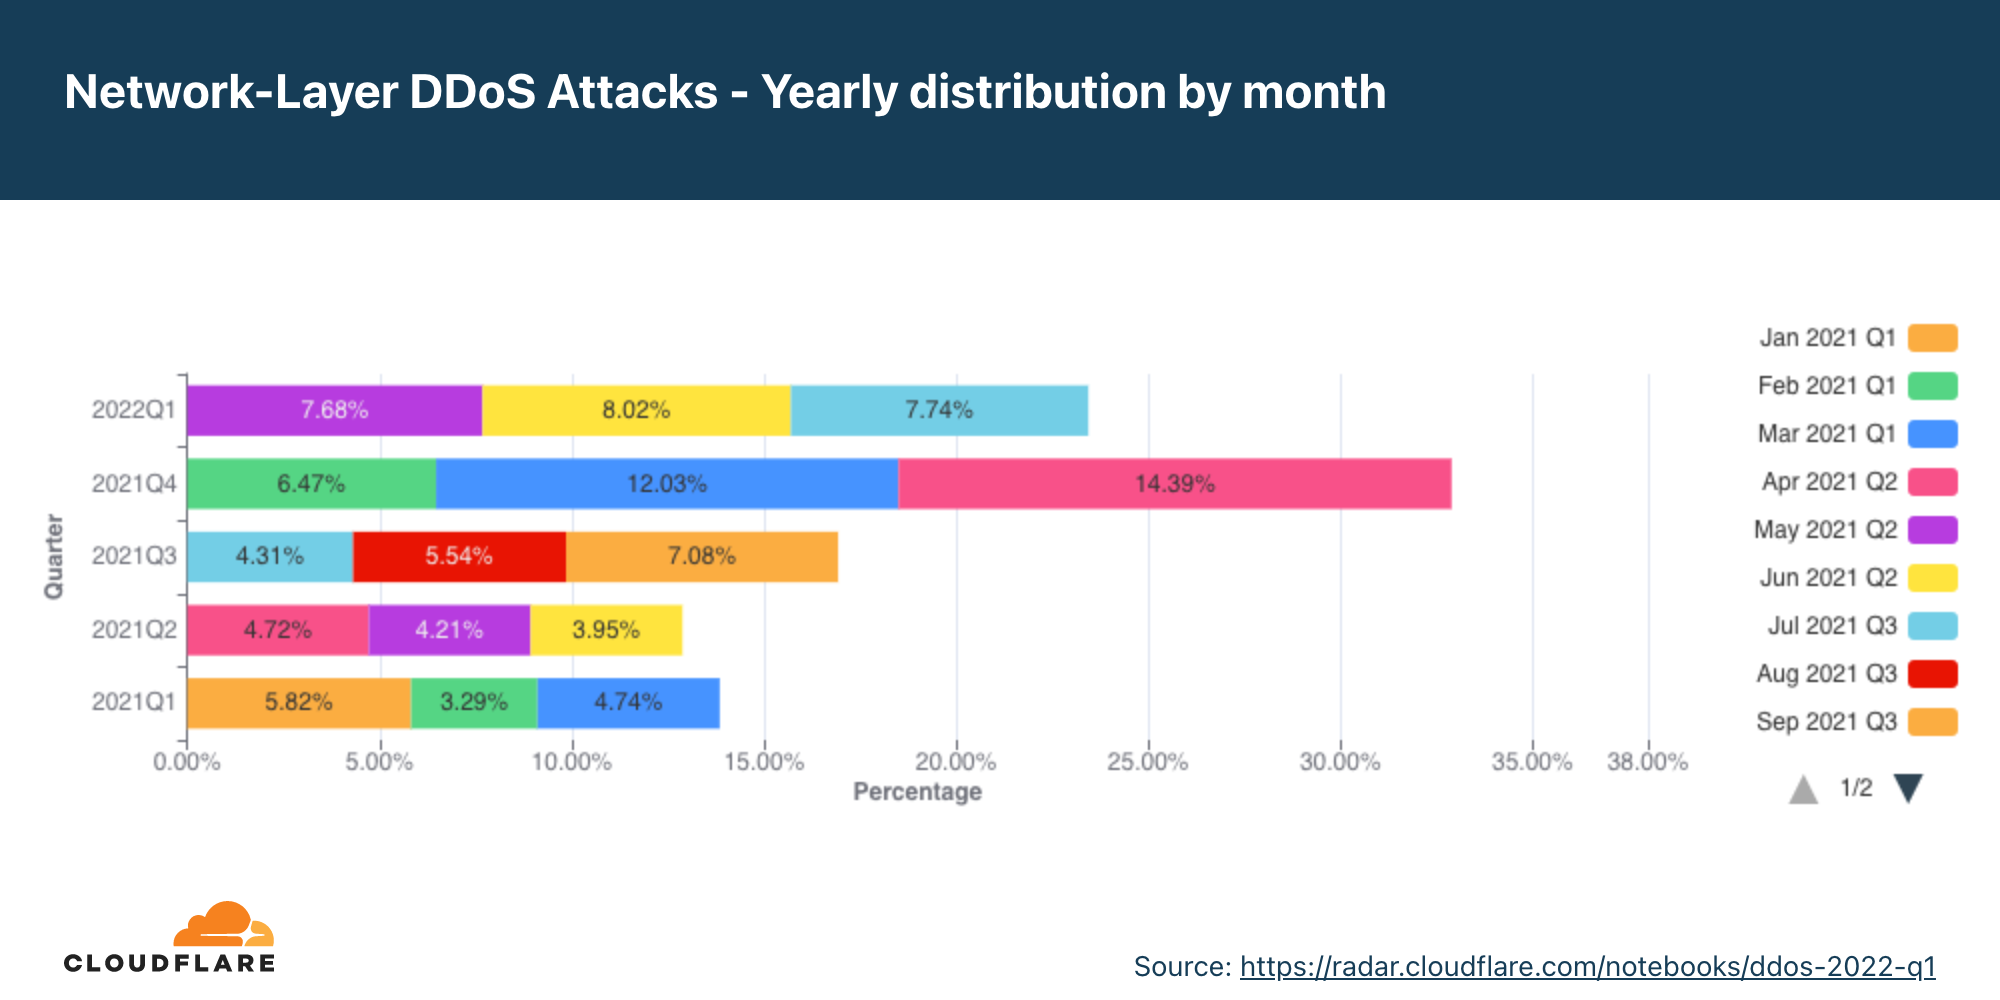 Graph of the yearly distribution of network-layer DDoS attacks by month in the past 12 months]